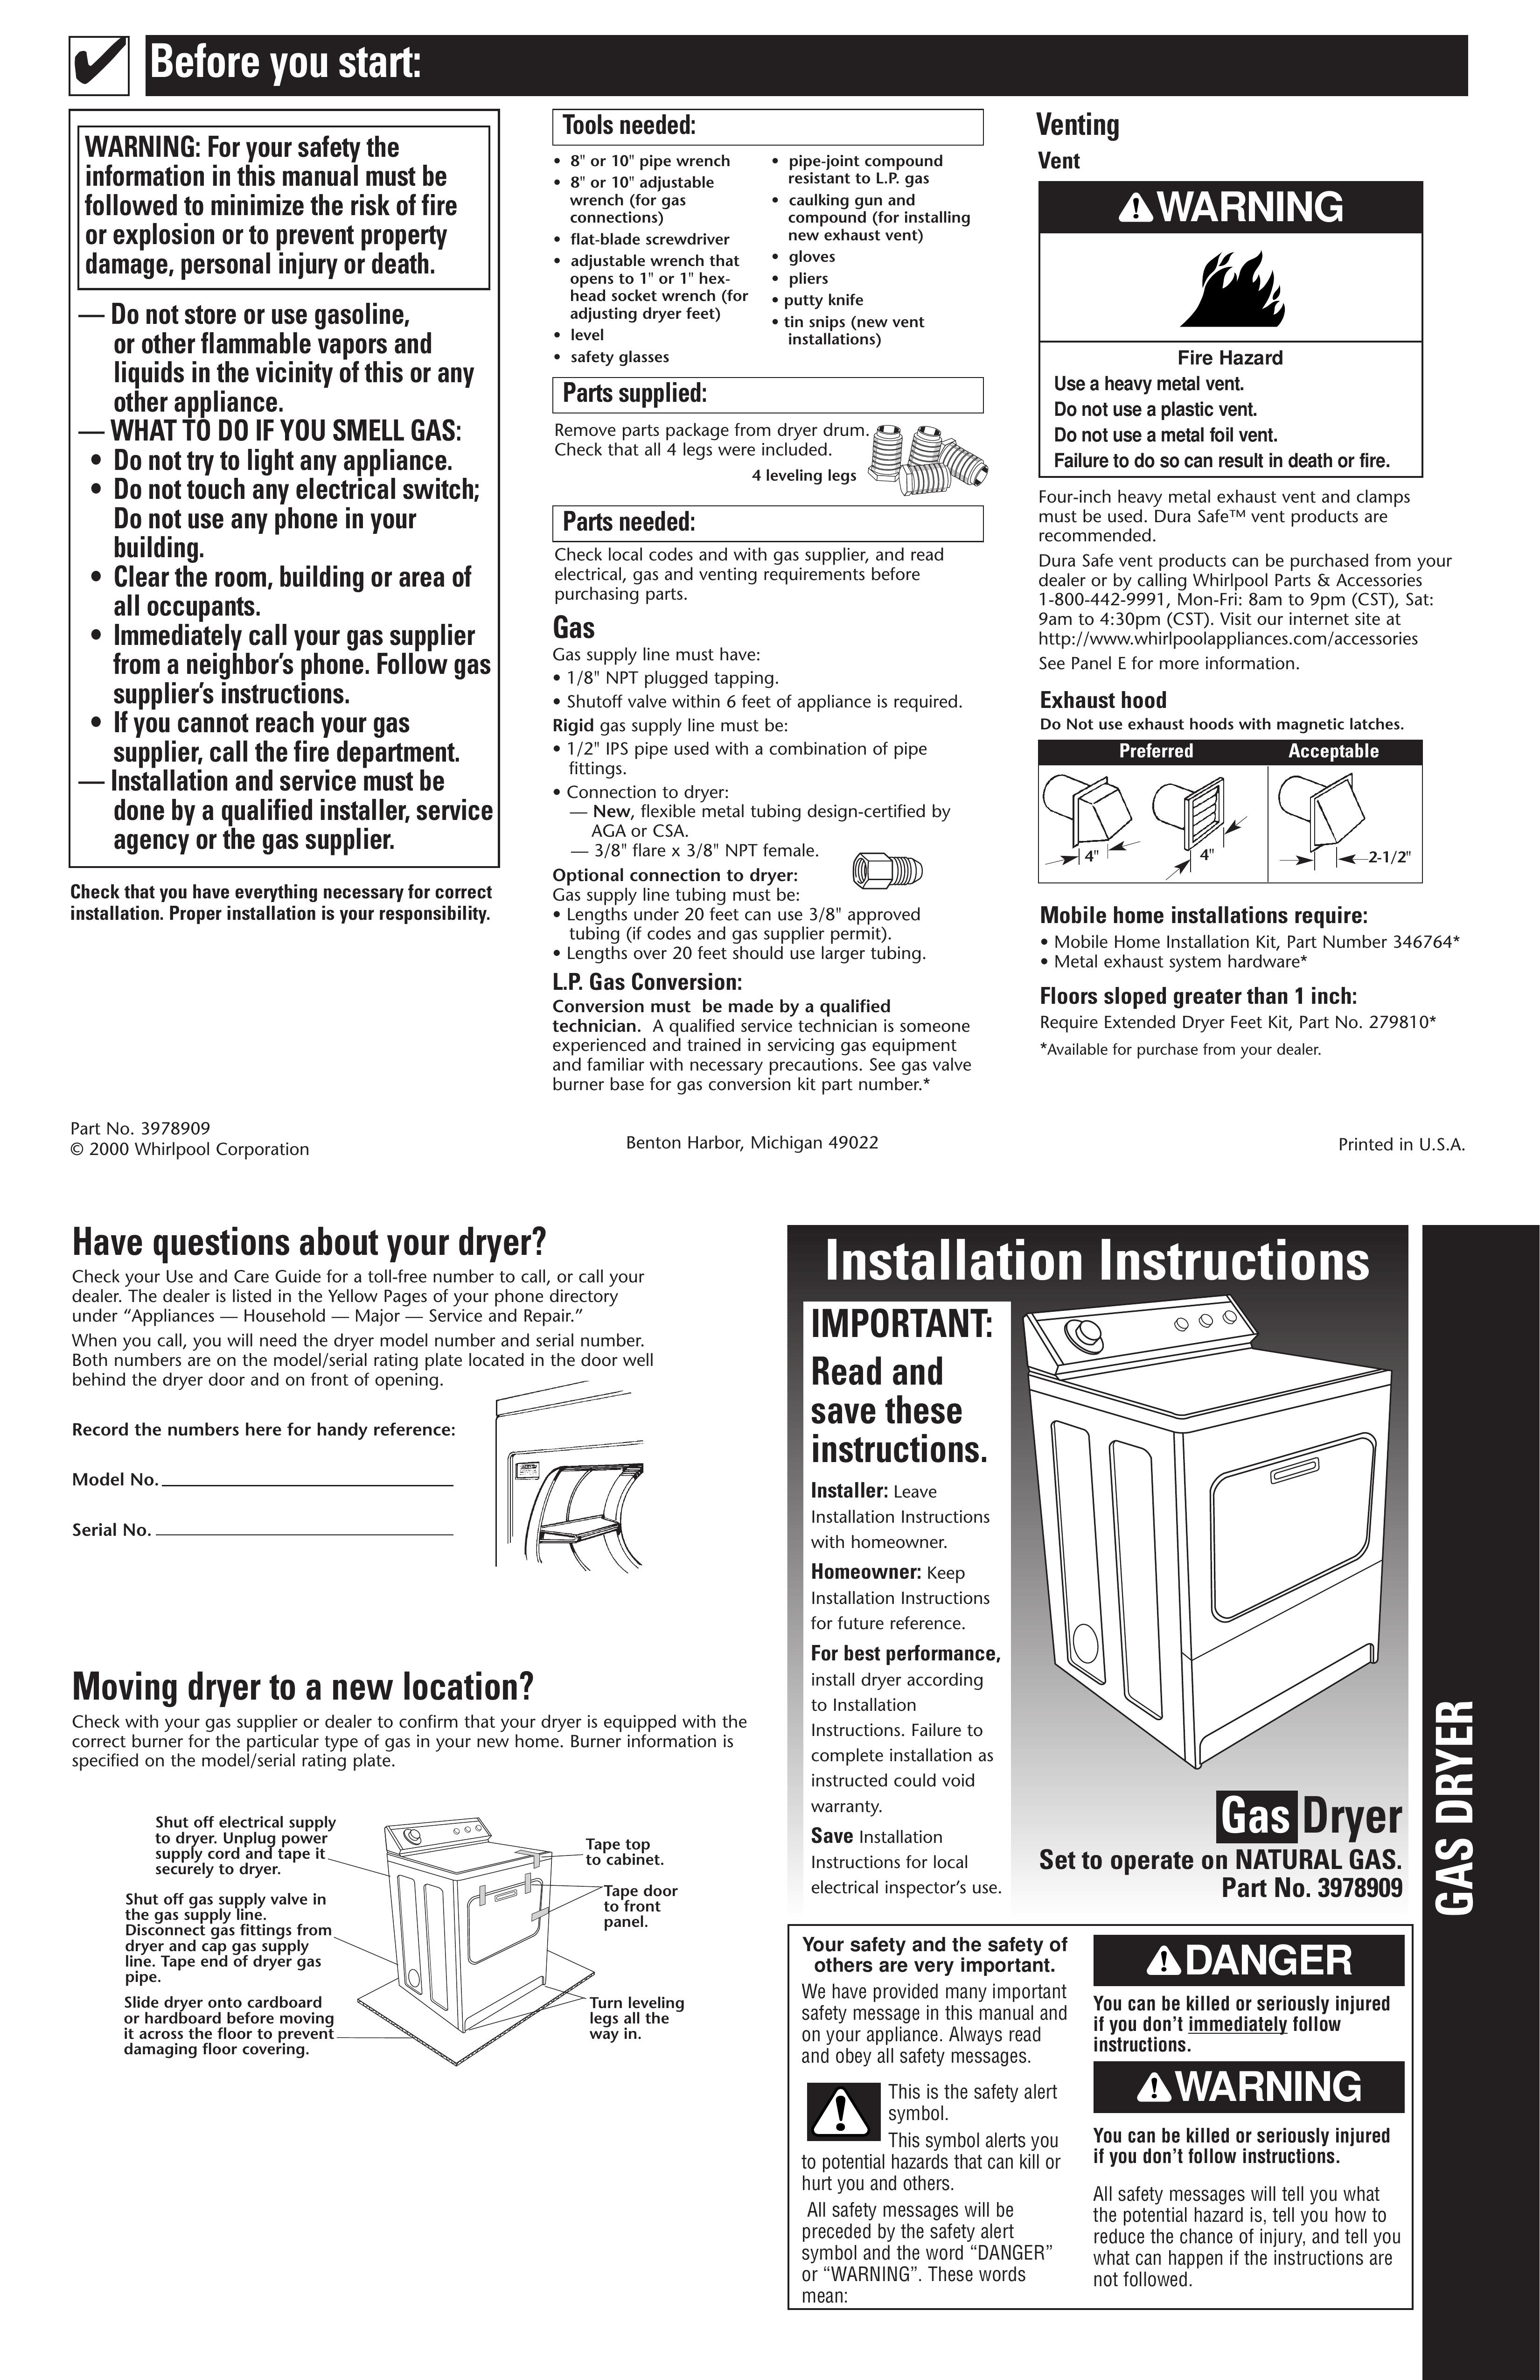 Whirlpool 3978909 Clothes Dryer User Manual